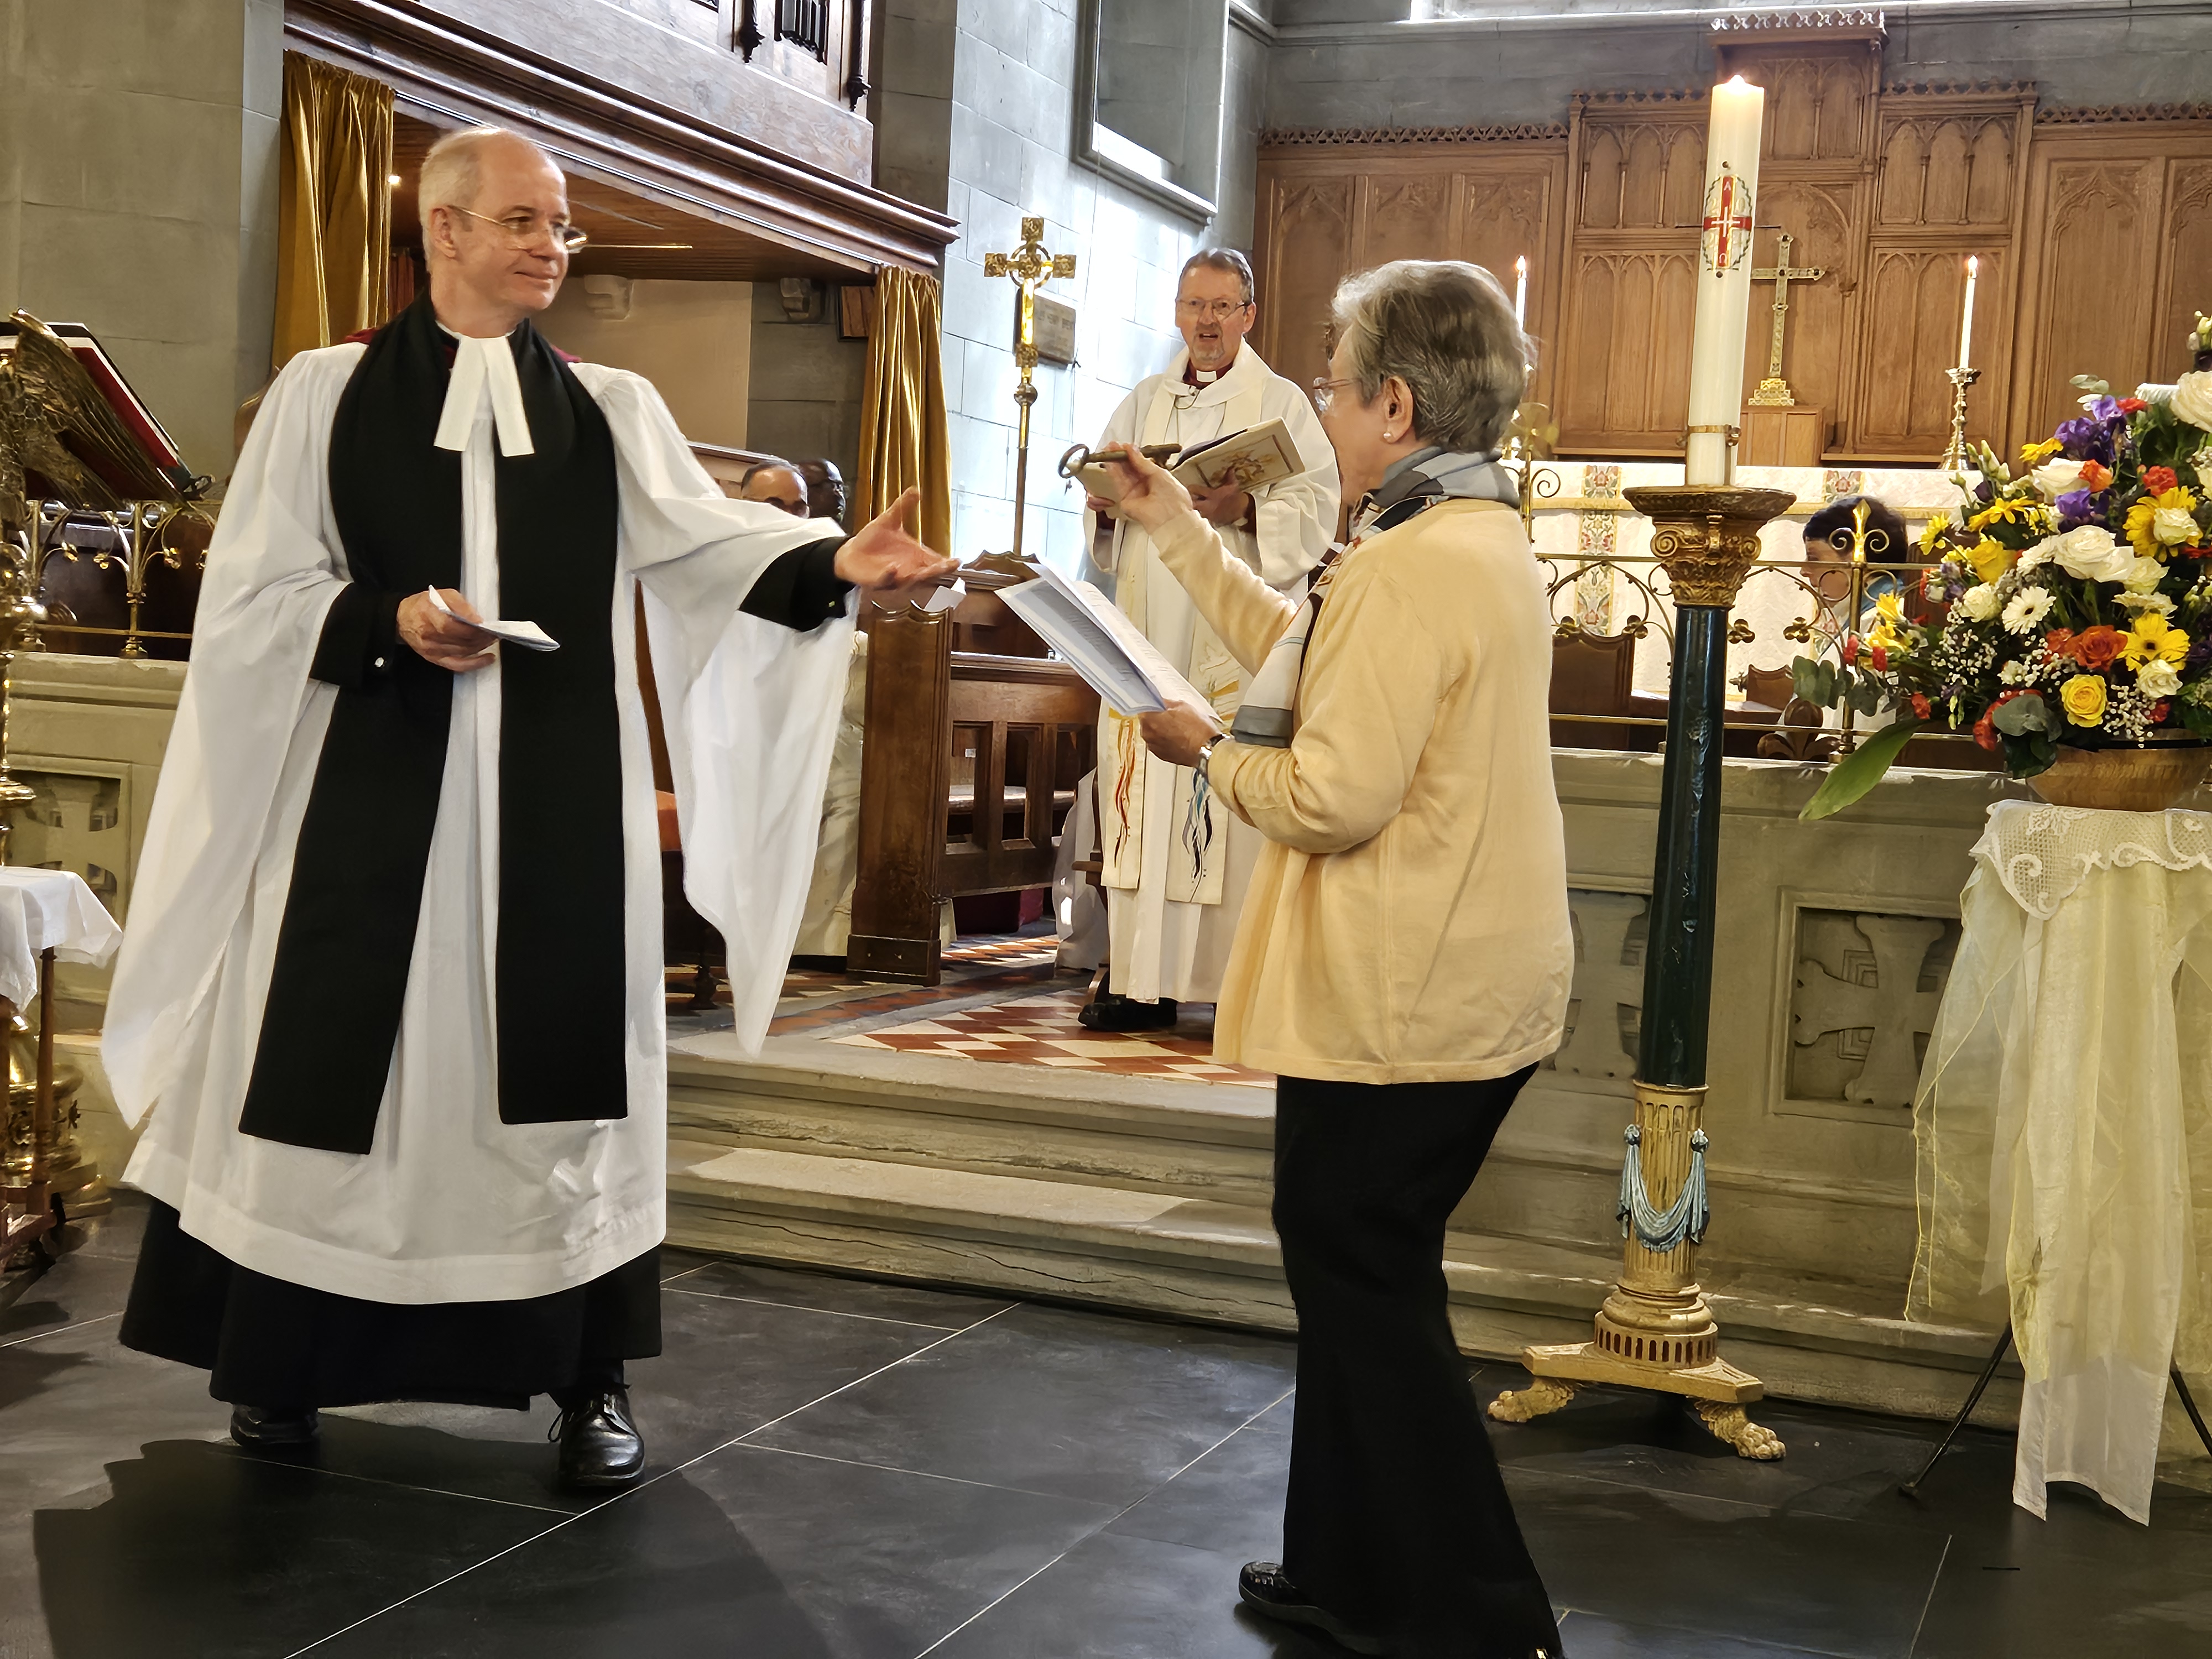 Reverend Dr. John Thompson symbolically receiving a key in Christ Church Lausanne